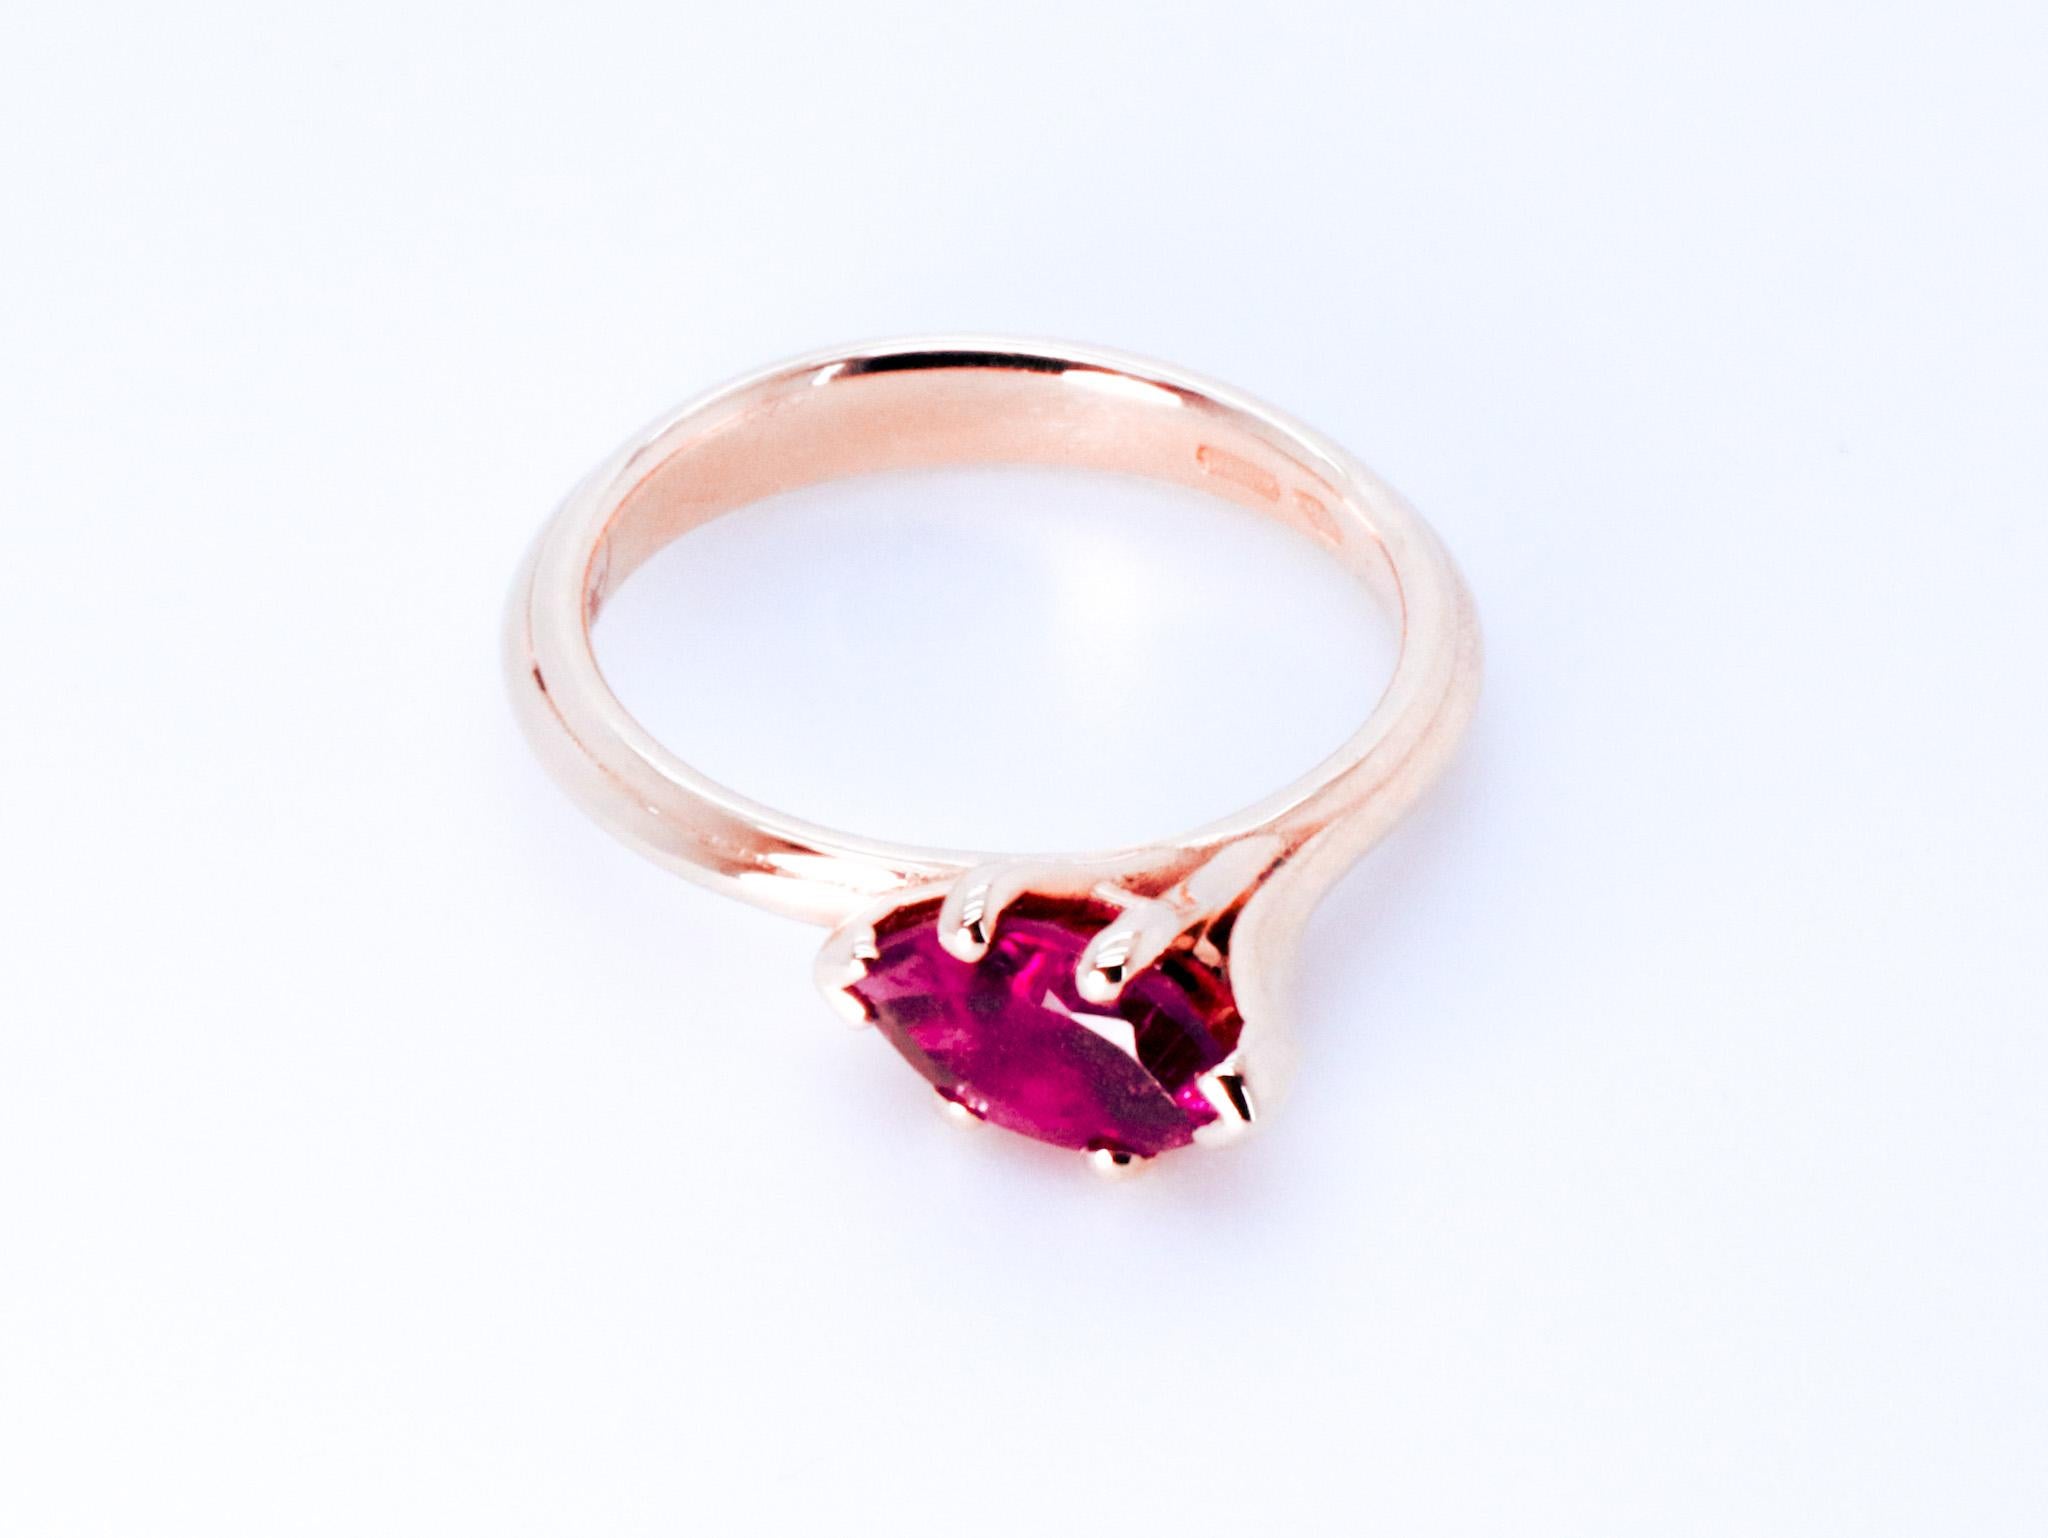 18k Rose Gold Asymmetric Cosmic Design Stackable Marquise Rubellite Cocktail Ring.
The Egle ring is made of 18 karat rose gold and features a marquise  mixed cut natural rubellite around 1.26 carats, which measures 4.9 mm by 10 mm by 4 mm. The total